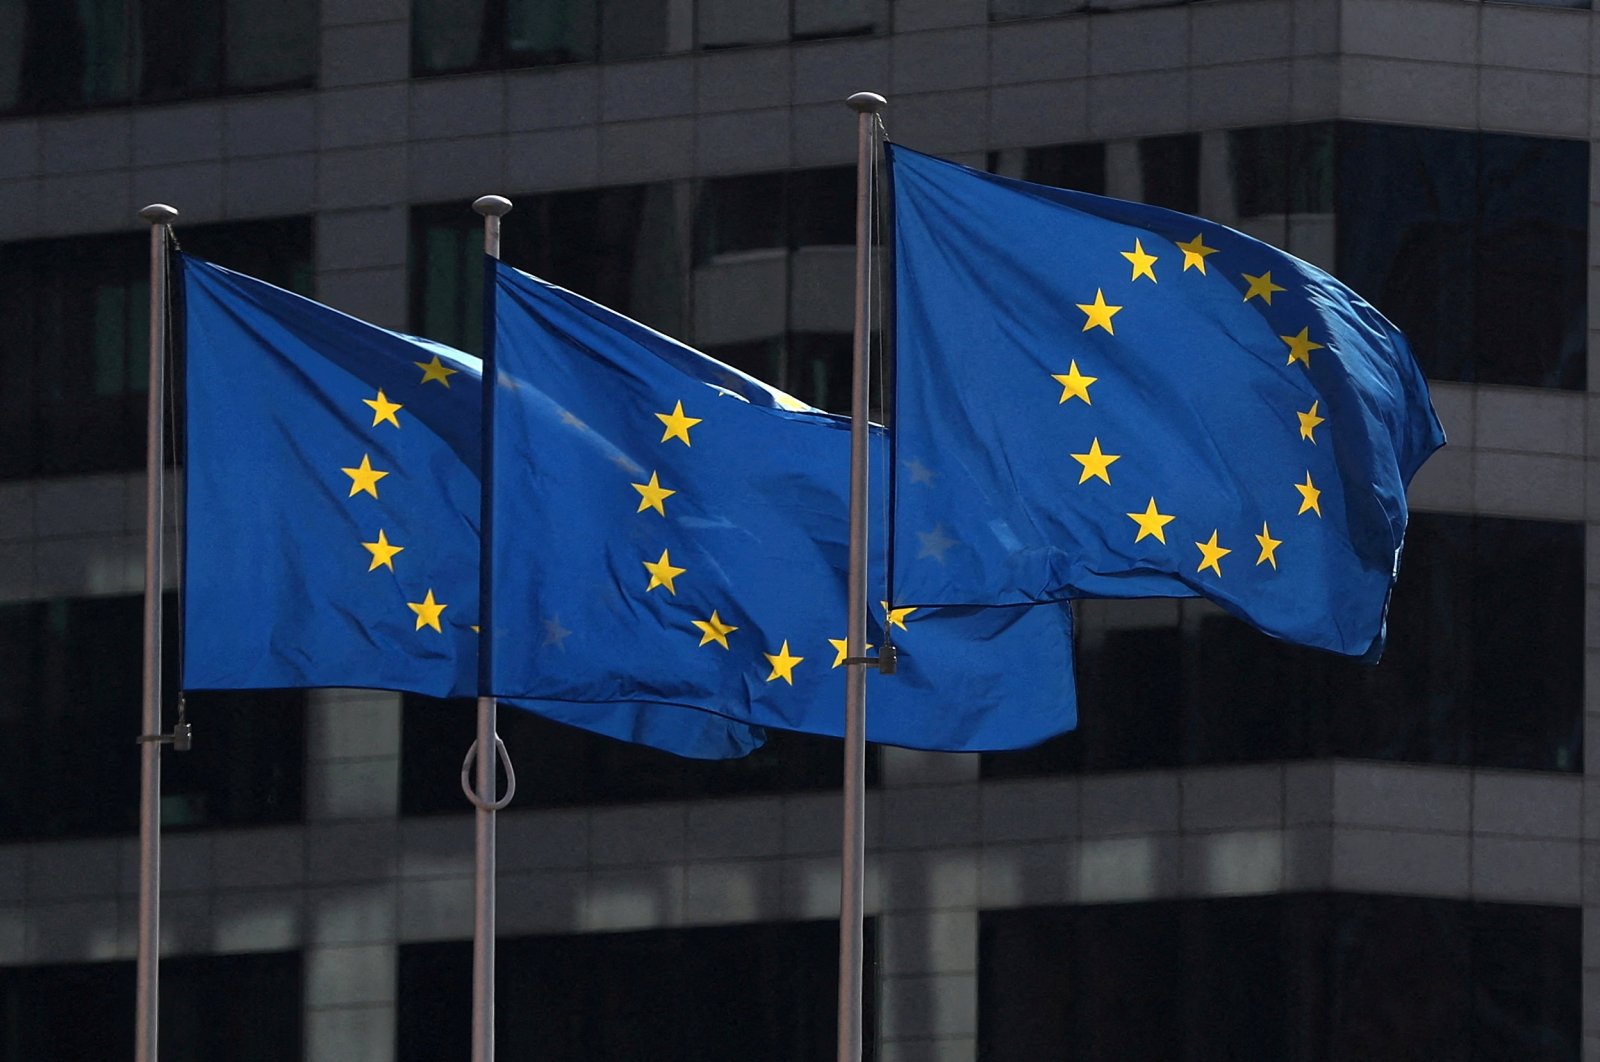 European Union flags fly outside the European Commission headquarters in Brussels, Belgium, April 10, 2019. (Reuters Photo)